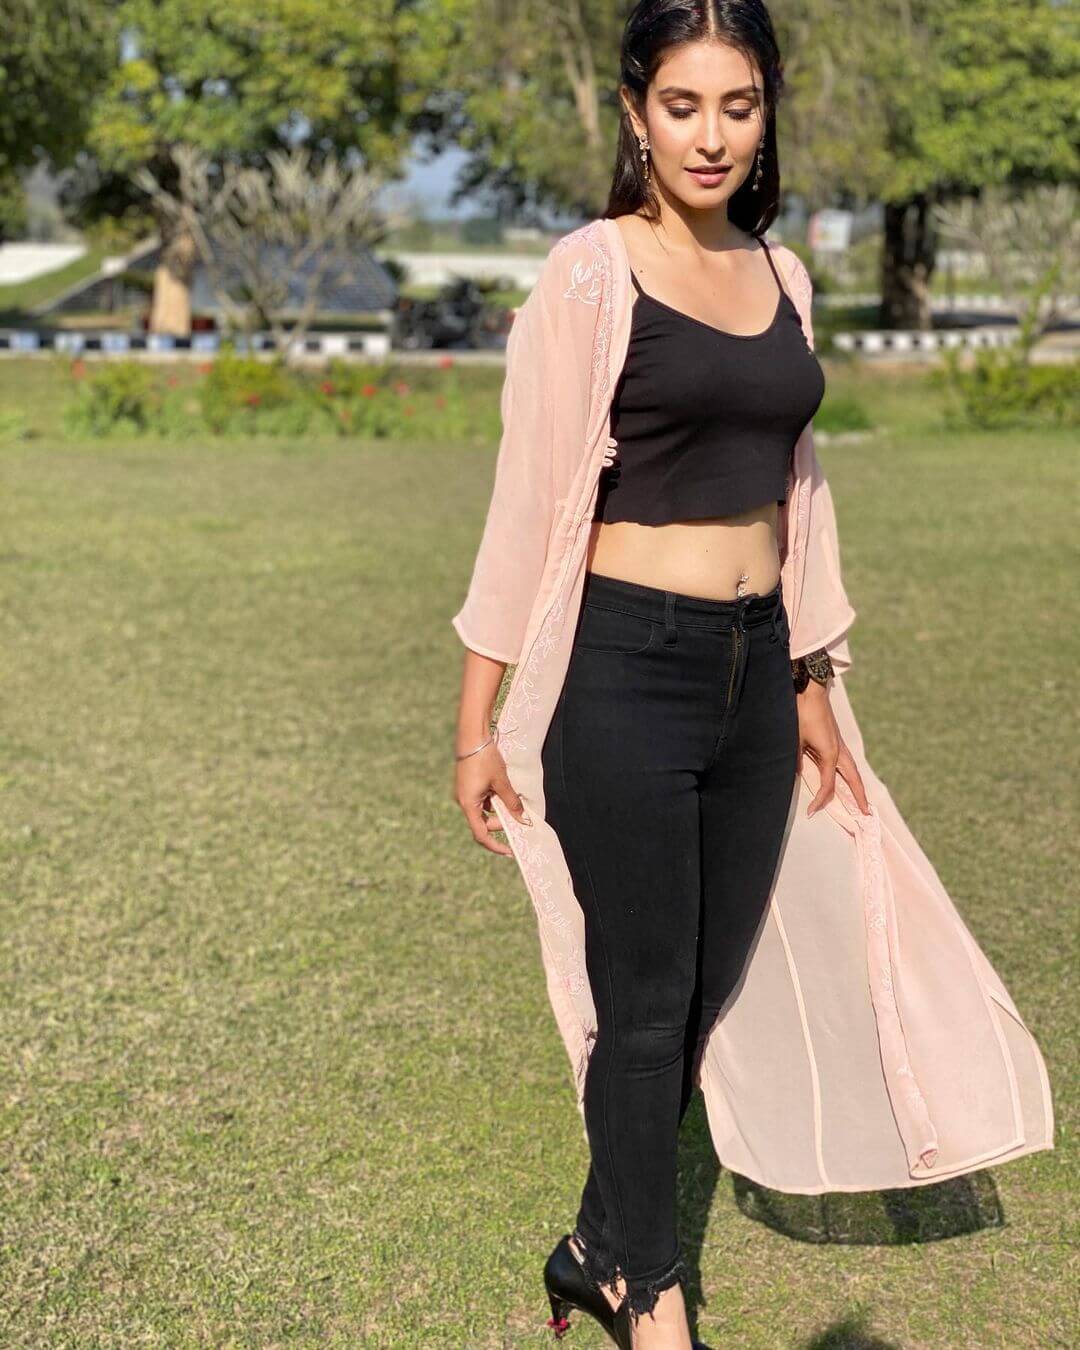 Navneet Kaur Dhillon Look Hot In Black Crop Top With Black Denim And Shrug Outfit